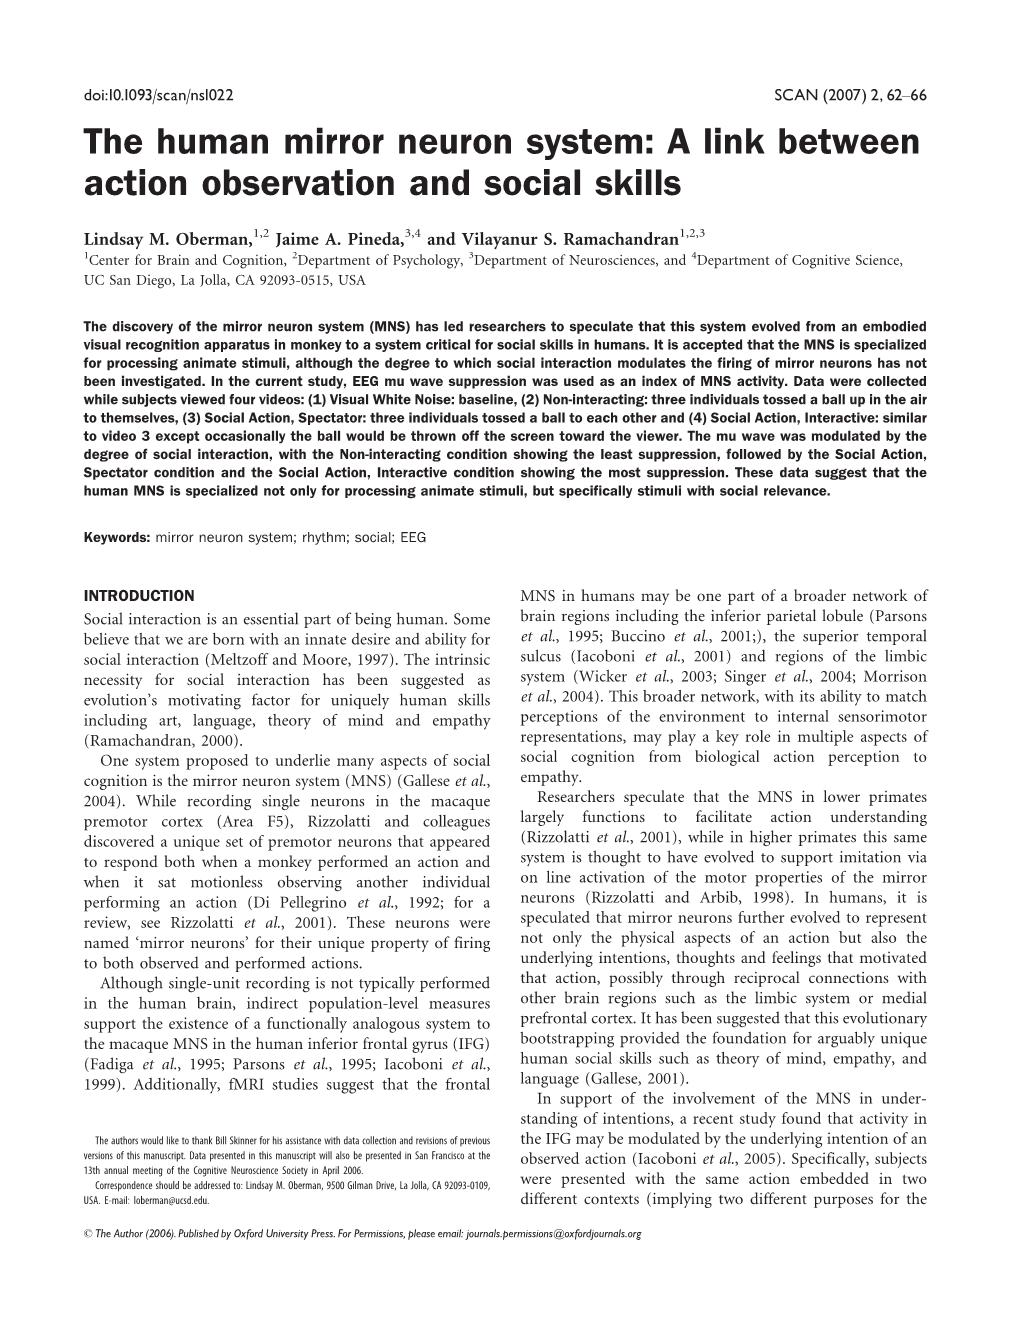 The Human Mirror Neuron System: a Link Between Action Observation and Social Skills